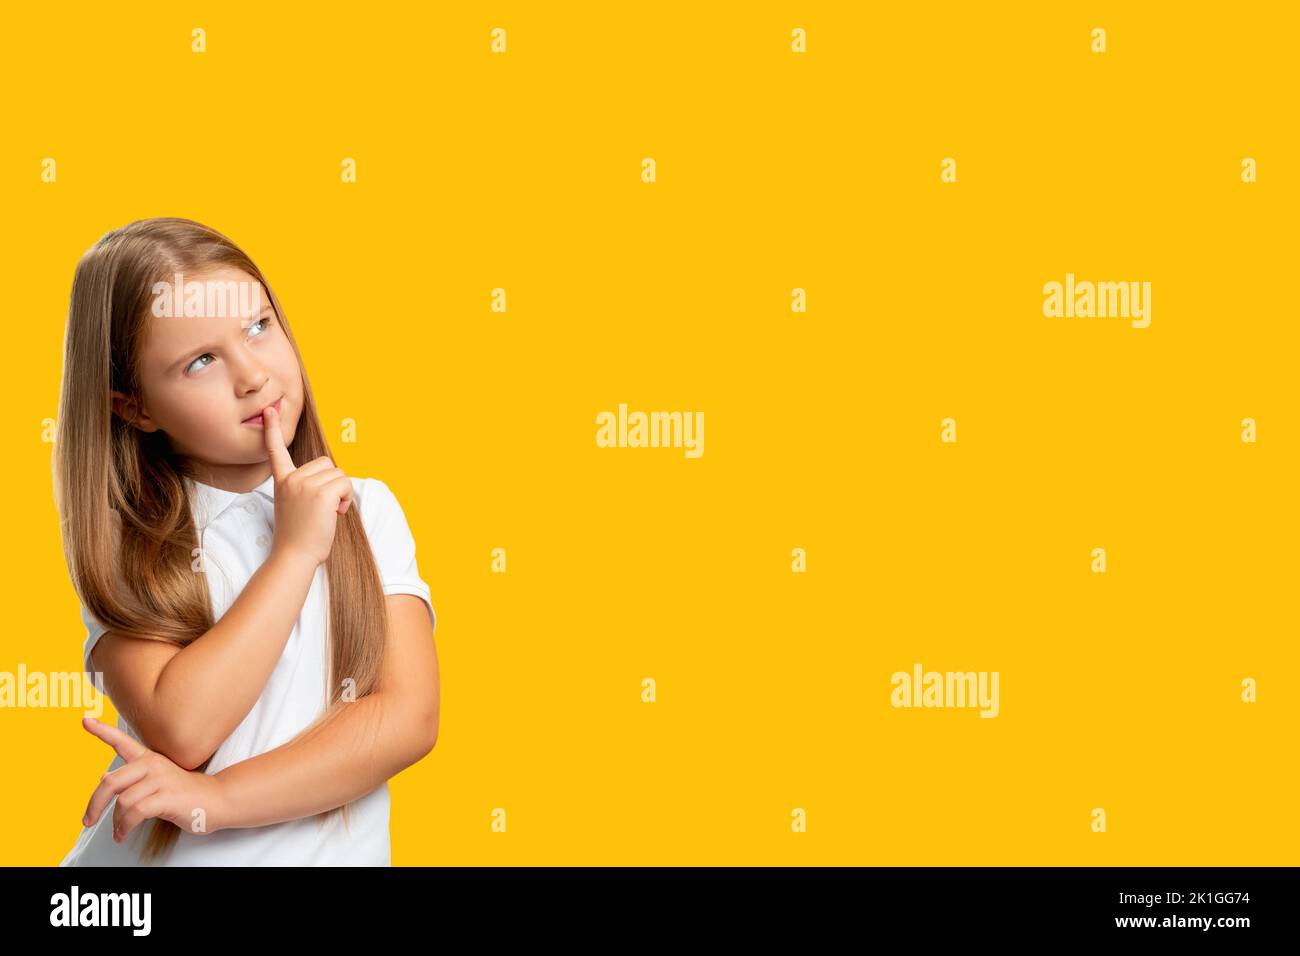 Curious kid. Commercial background. Special offer. Portrait of pensive unsure young girl thinking considering invisible option isolated on yellow empt Stock Photo